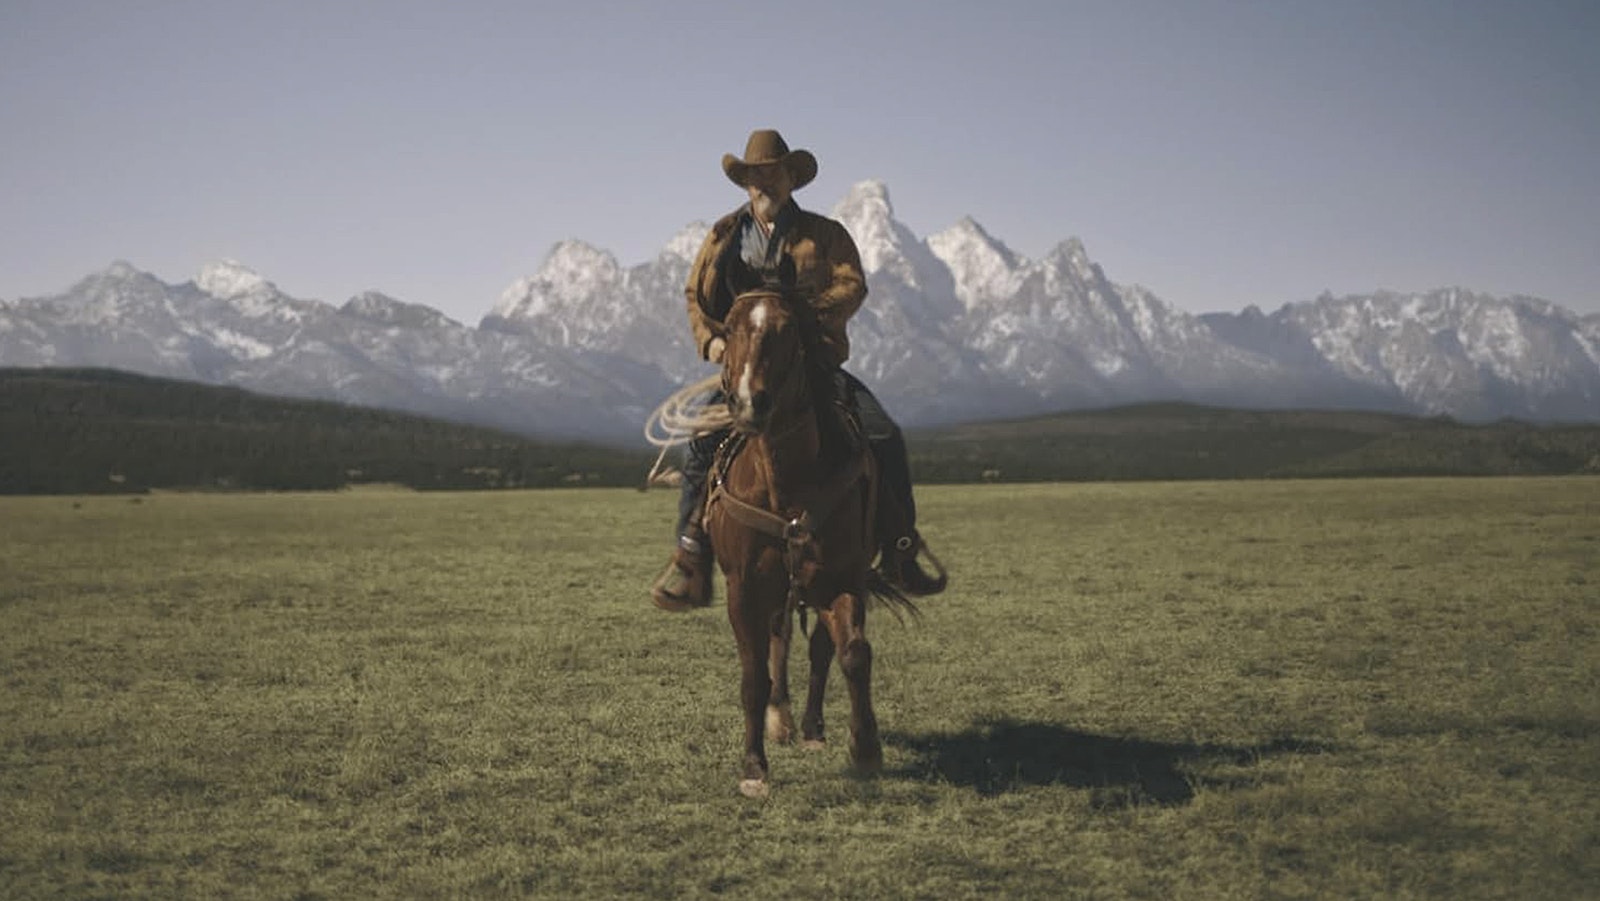 Rancher Royal Abbott rides his range in New Mexico with CGI Tetons serving to place his spread in Wyoming.